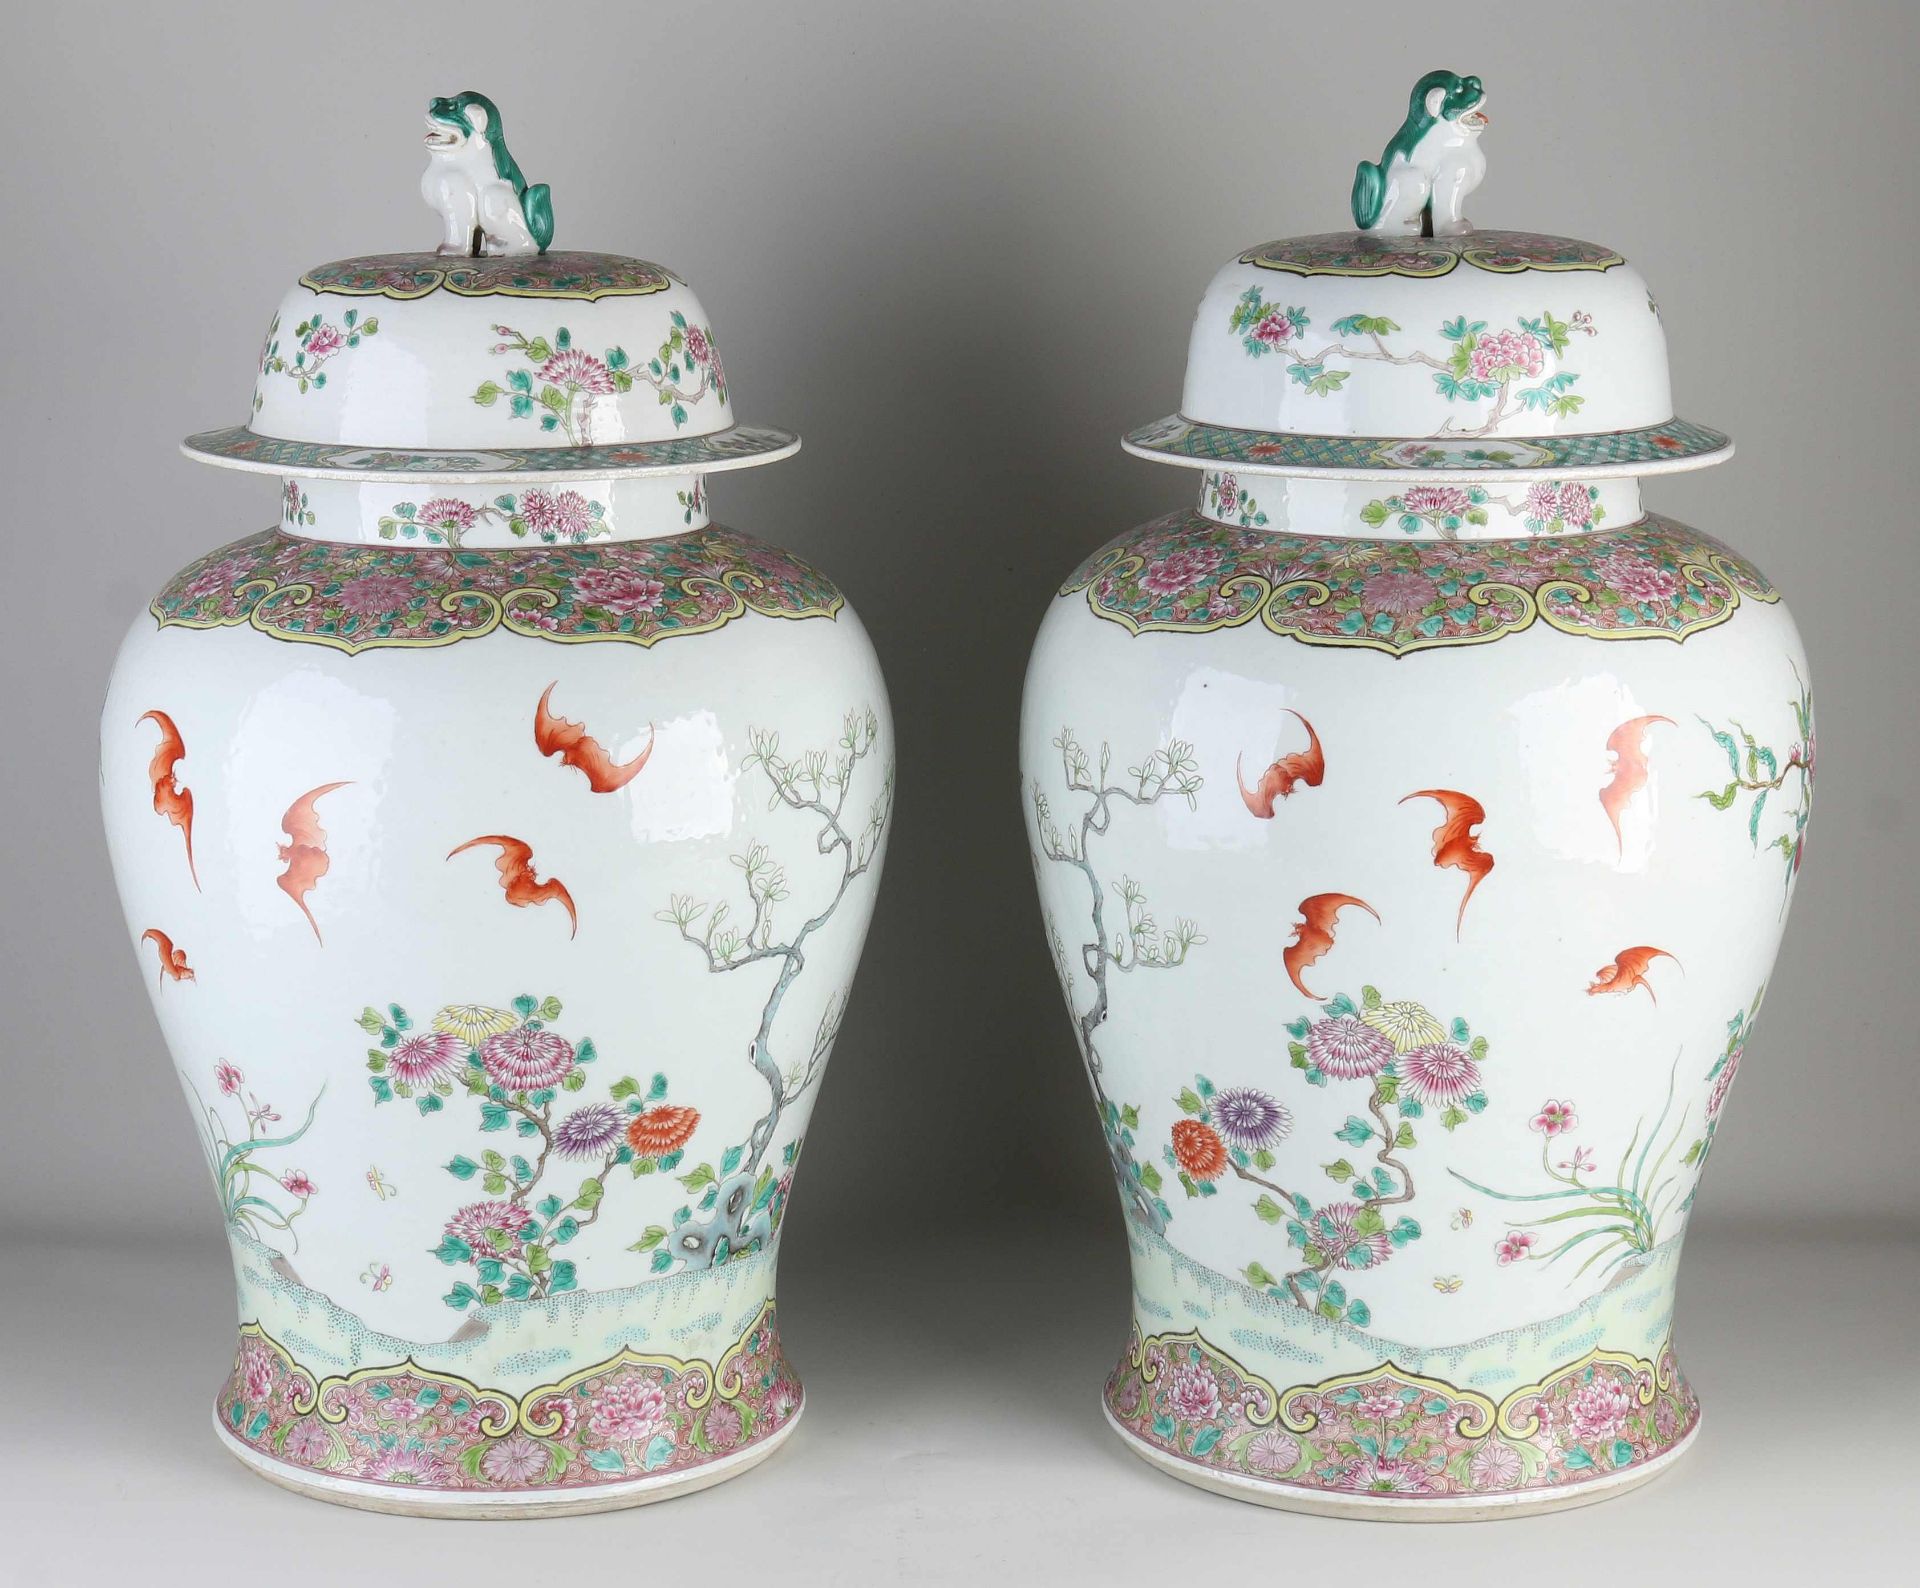 Two large Chinese Family Rose vases with lids, H 56 cm. - Image 2 of 3